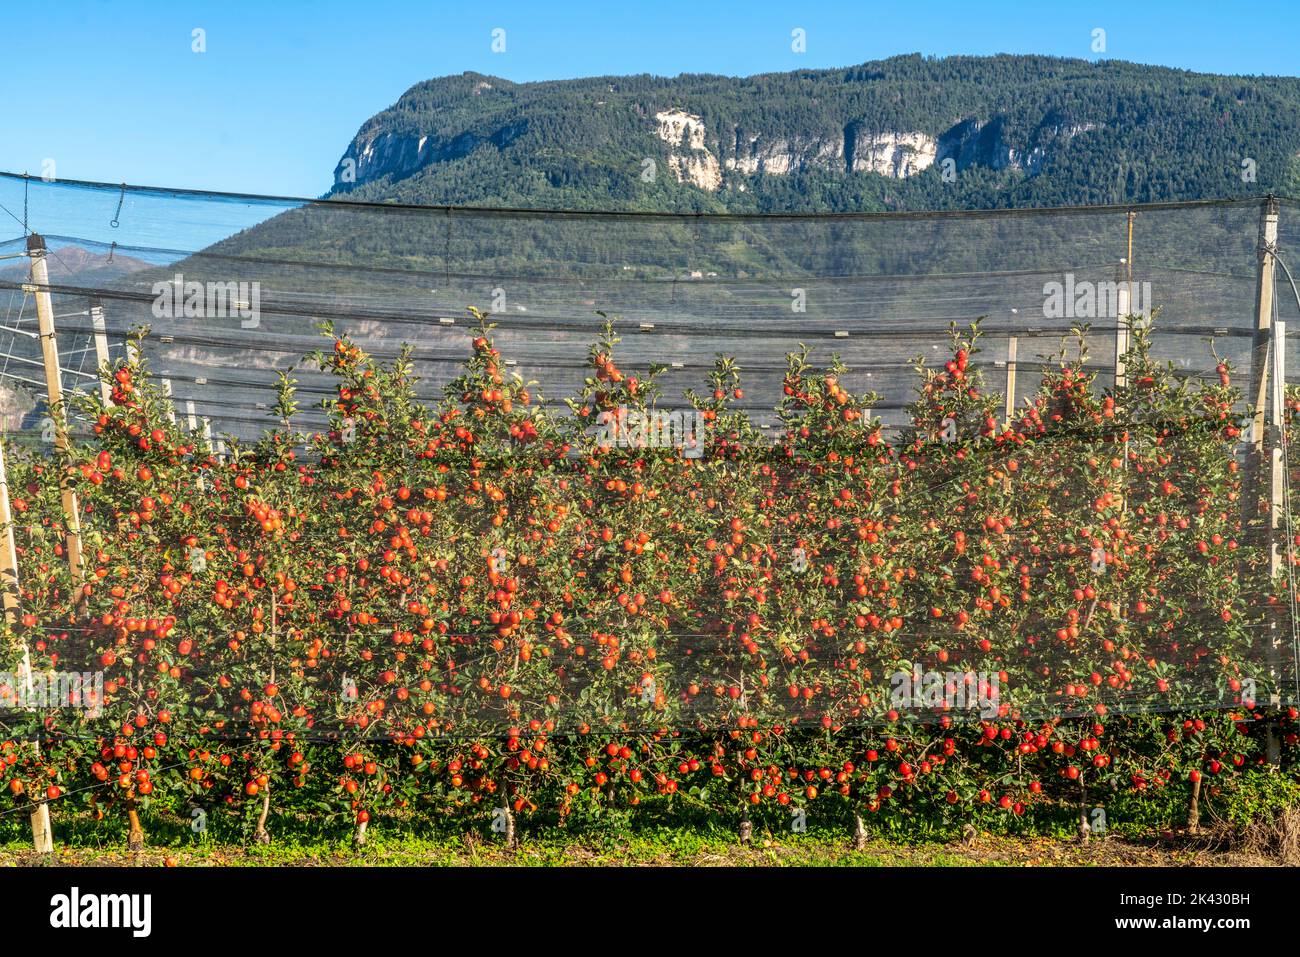 Apple-growing area in the Adige Valley, South Tyrol, large areas under cultivation, in South Tyrol over 18,400 hectares, cultivated by over 7,000 frui Stock Photo